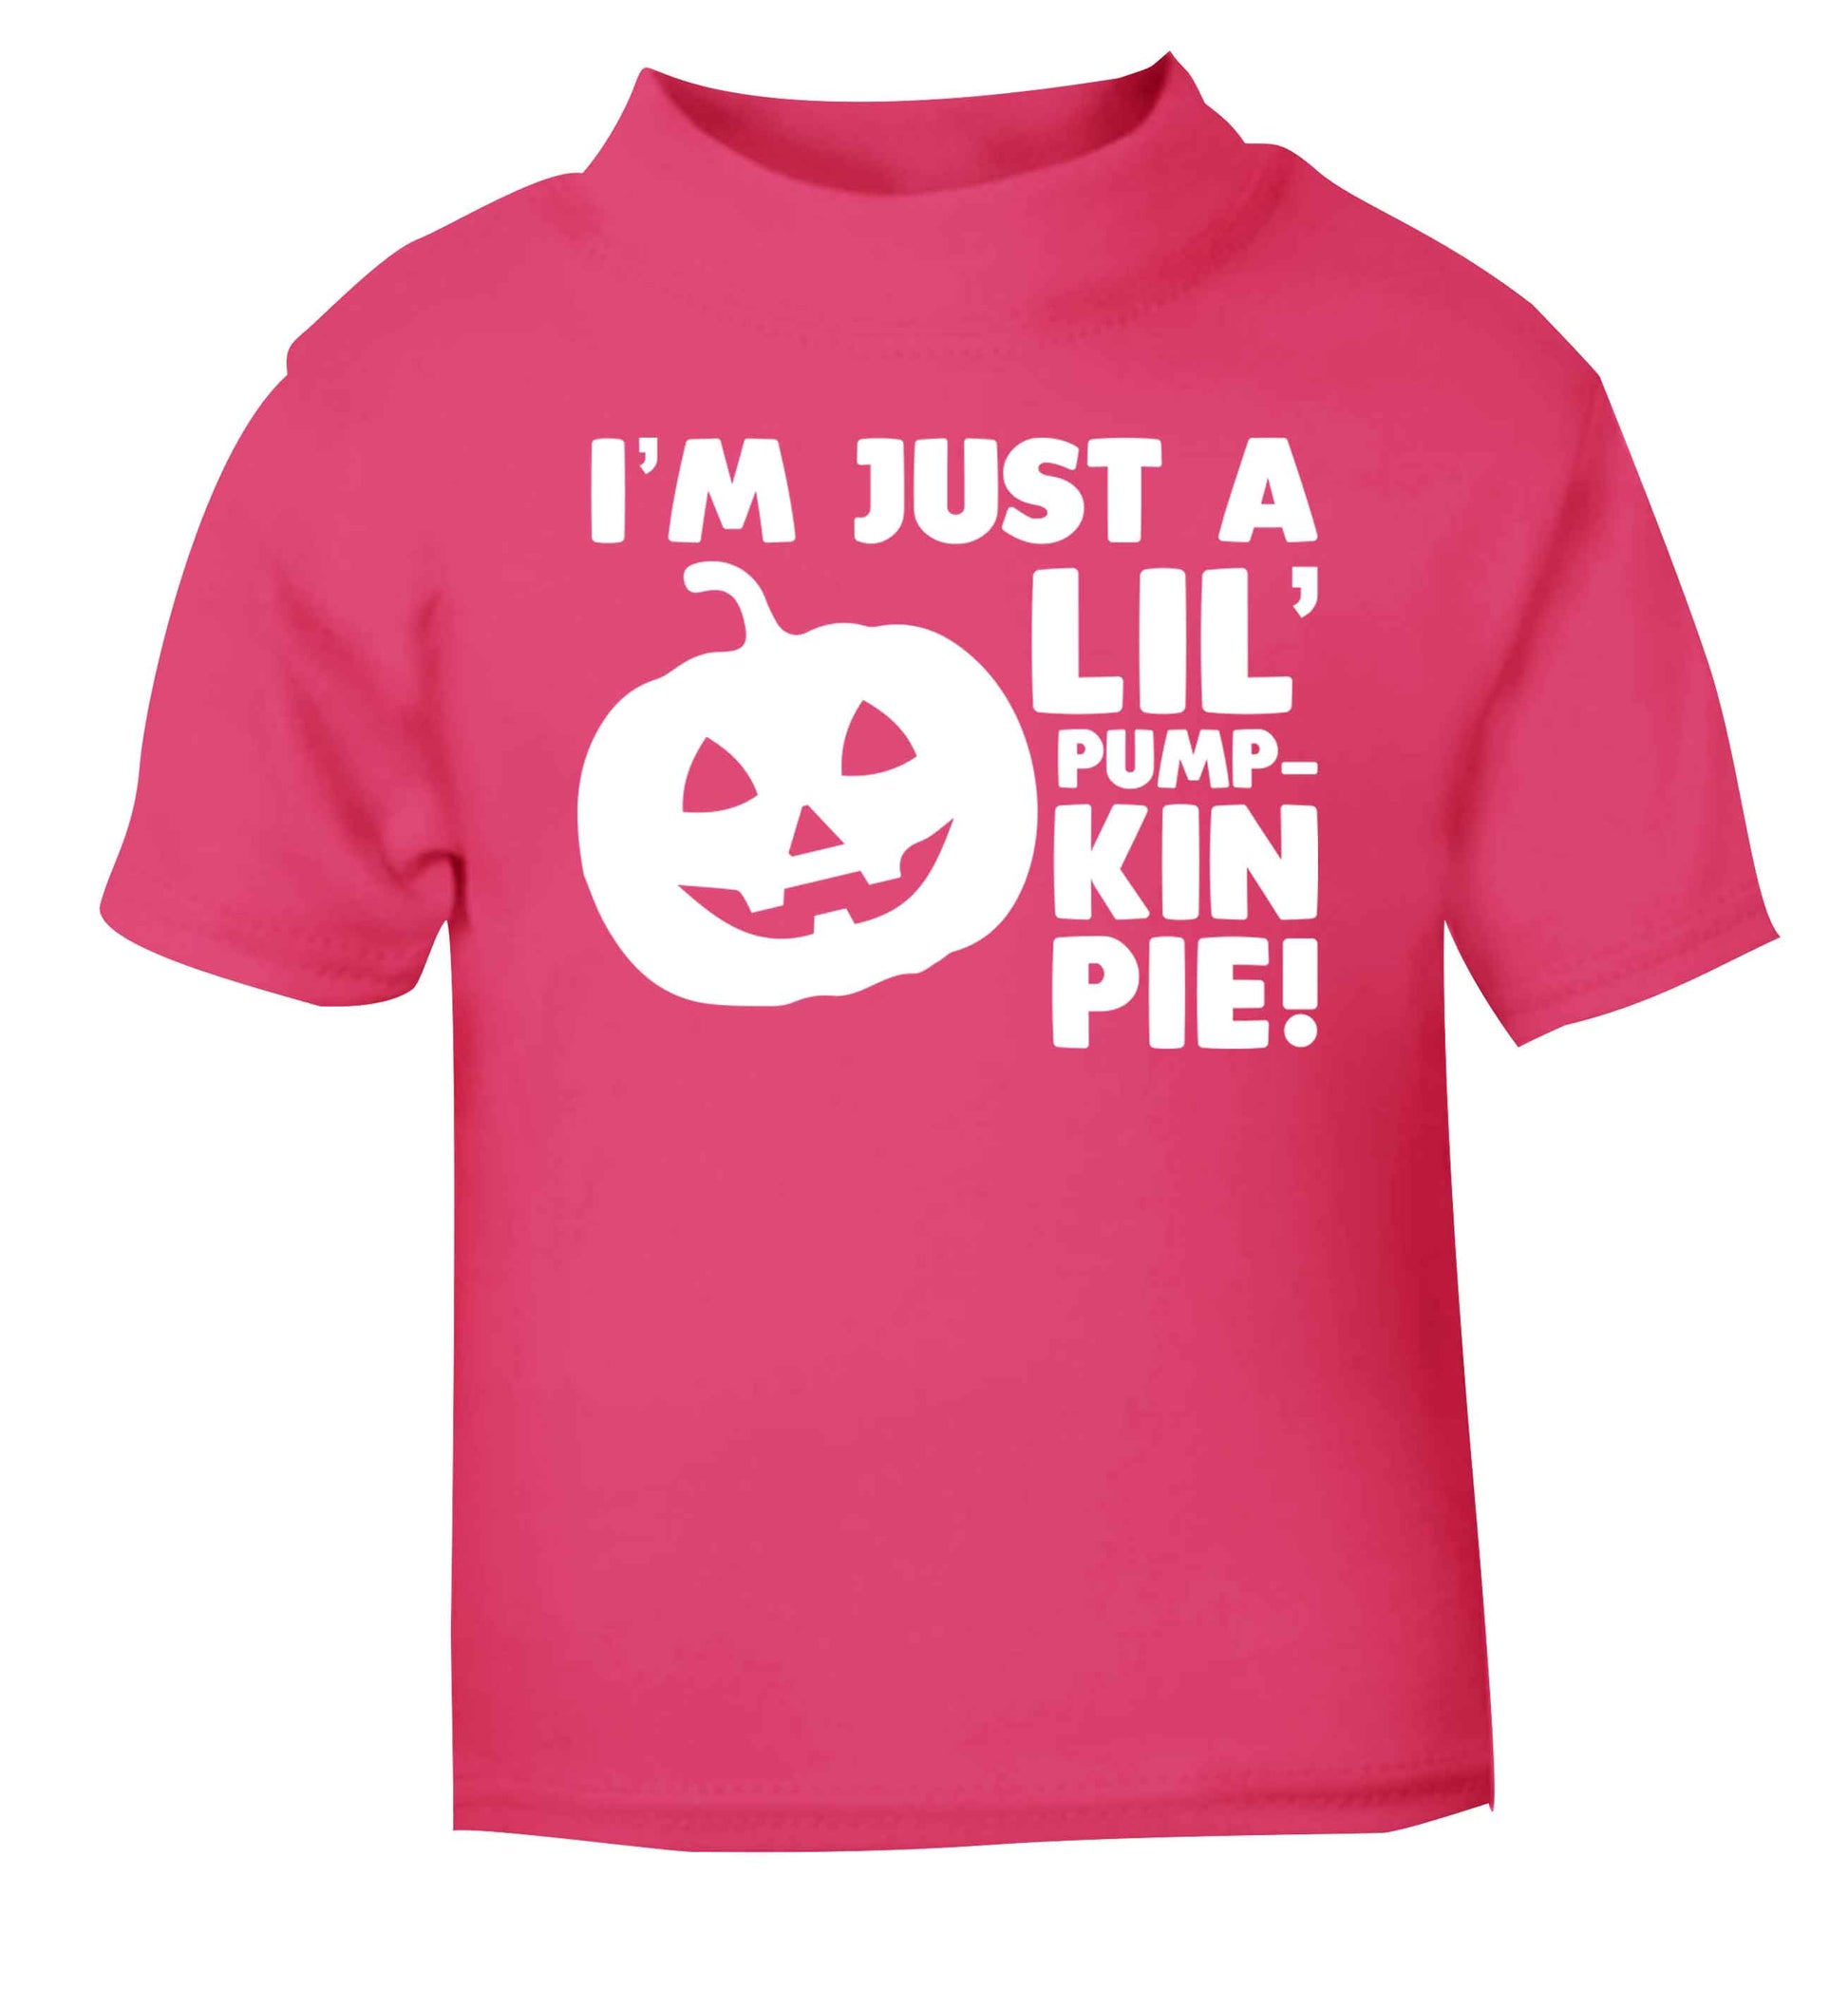 I'm just a lil' pumpkin pie pink baby toddler Tshirt 2 Years